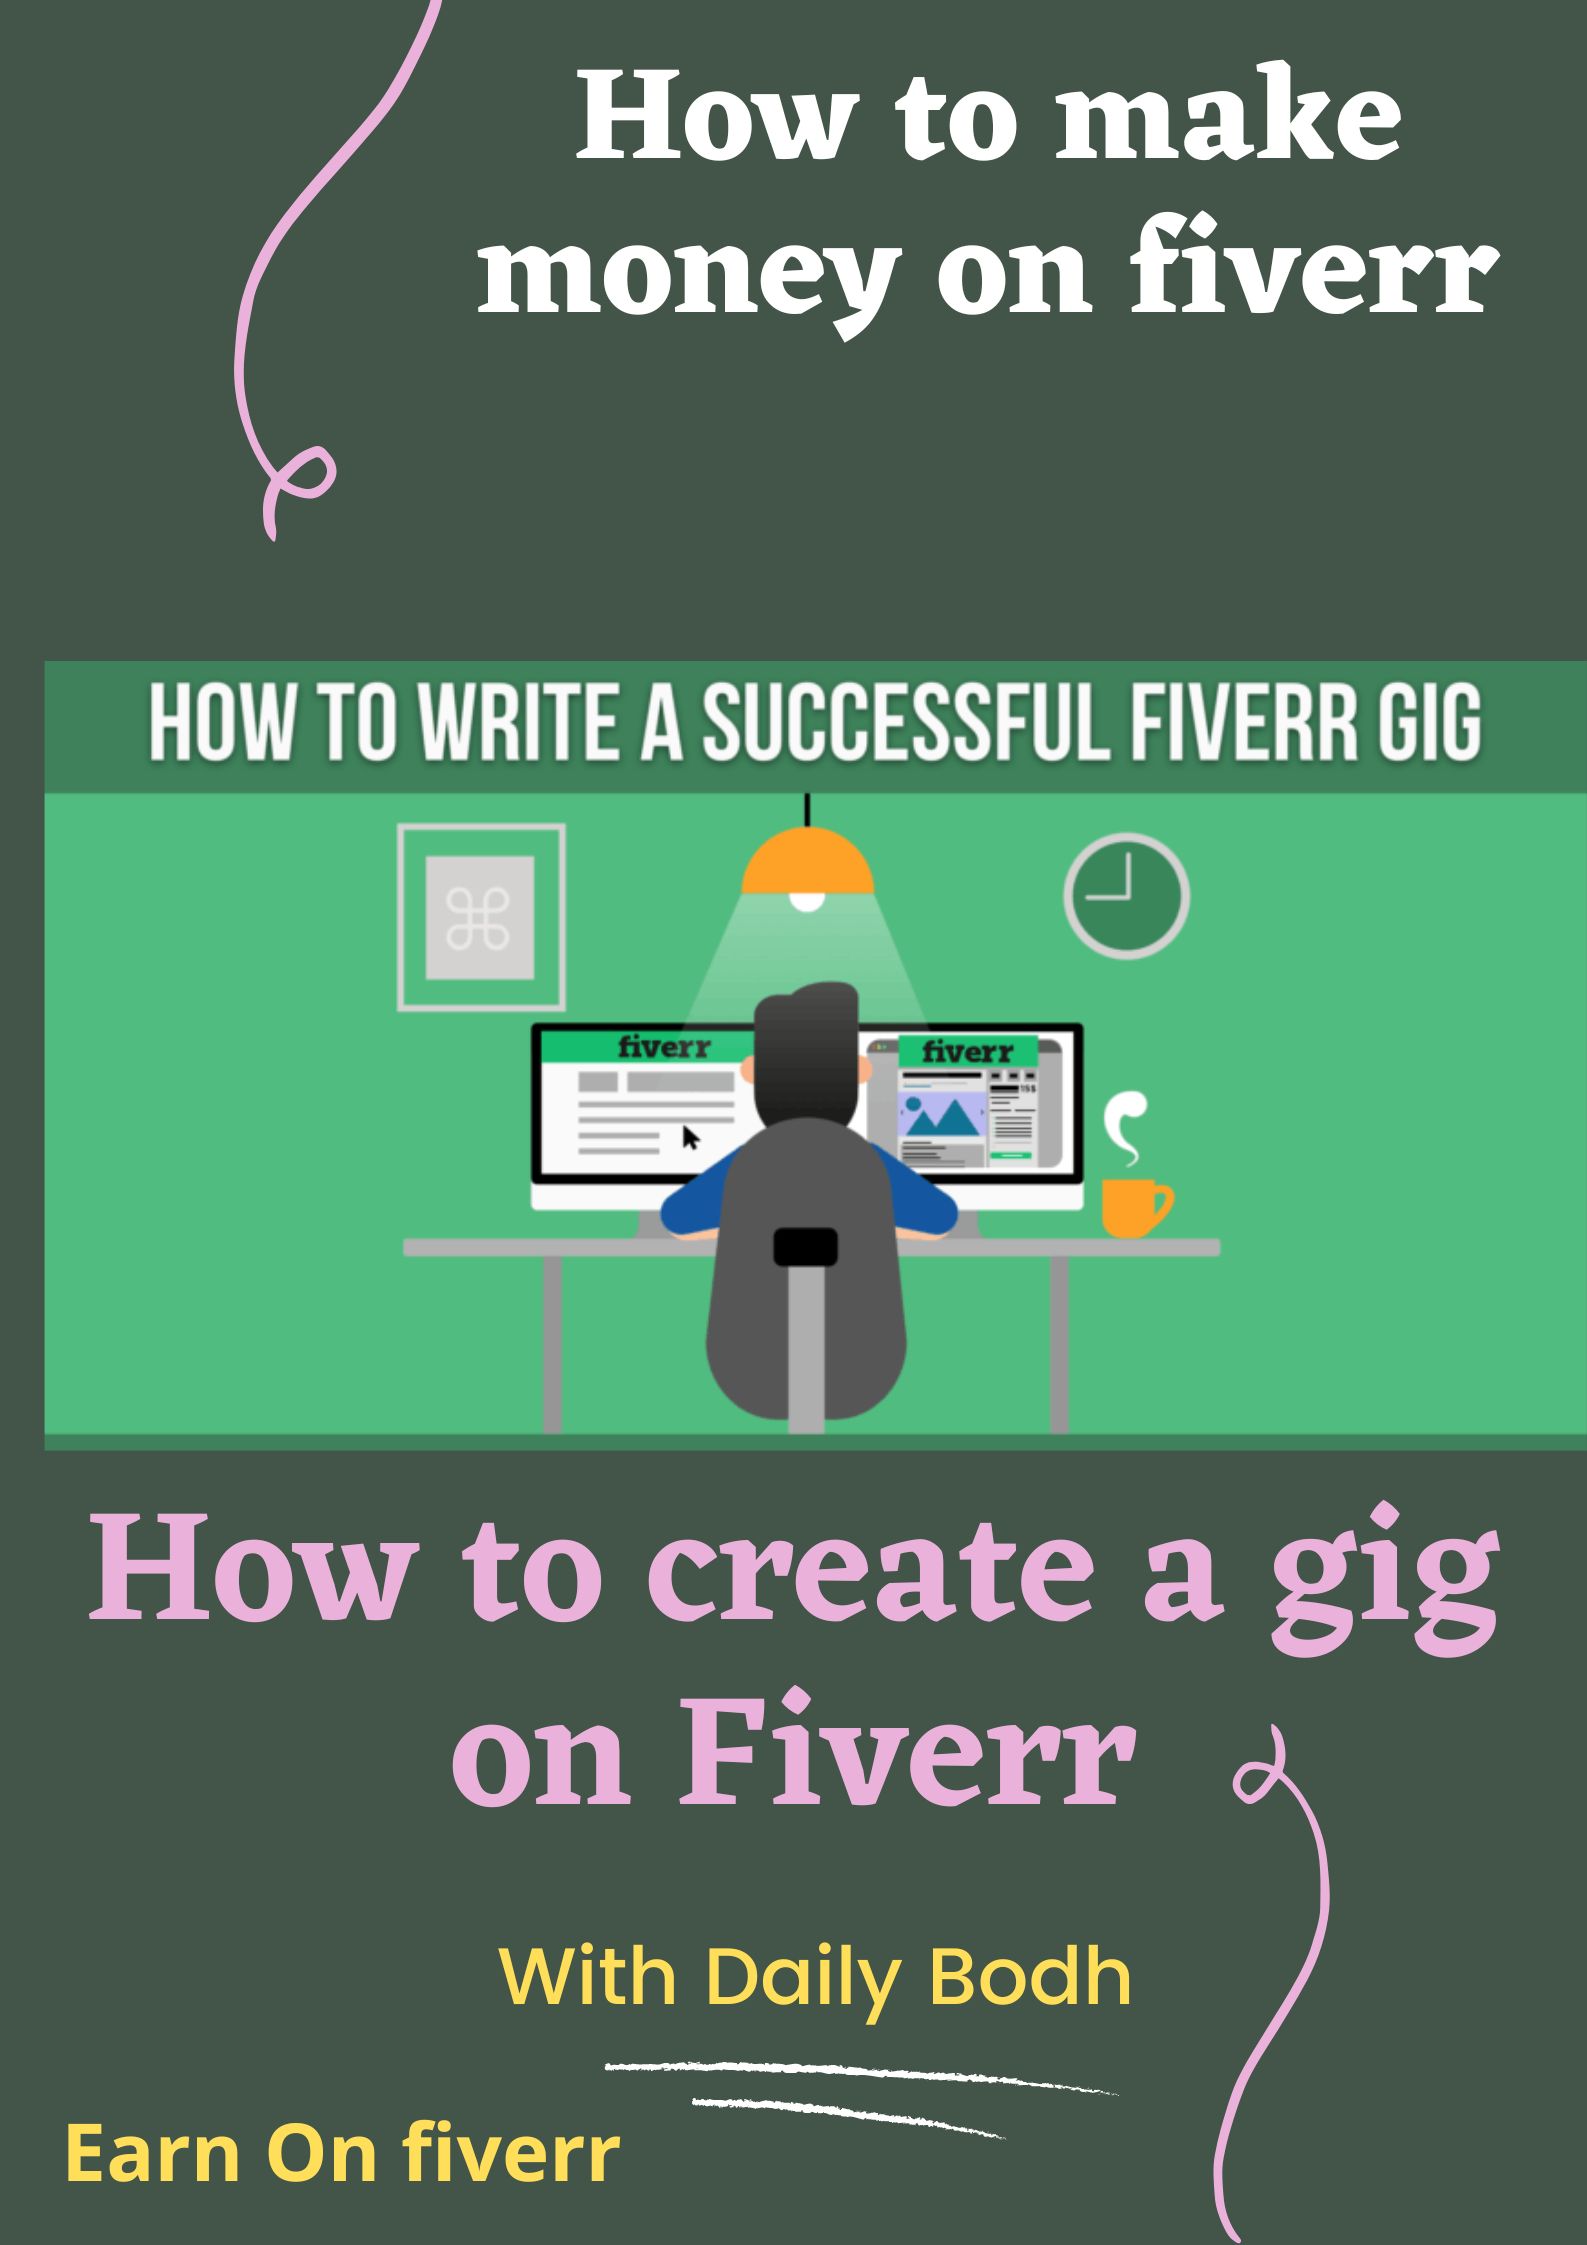 How to create a gig on Fiverr (How to make money on fiverr)